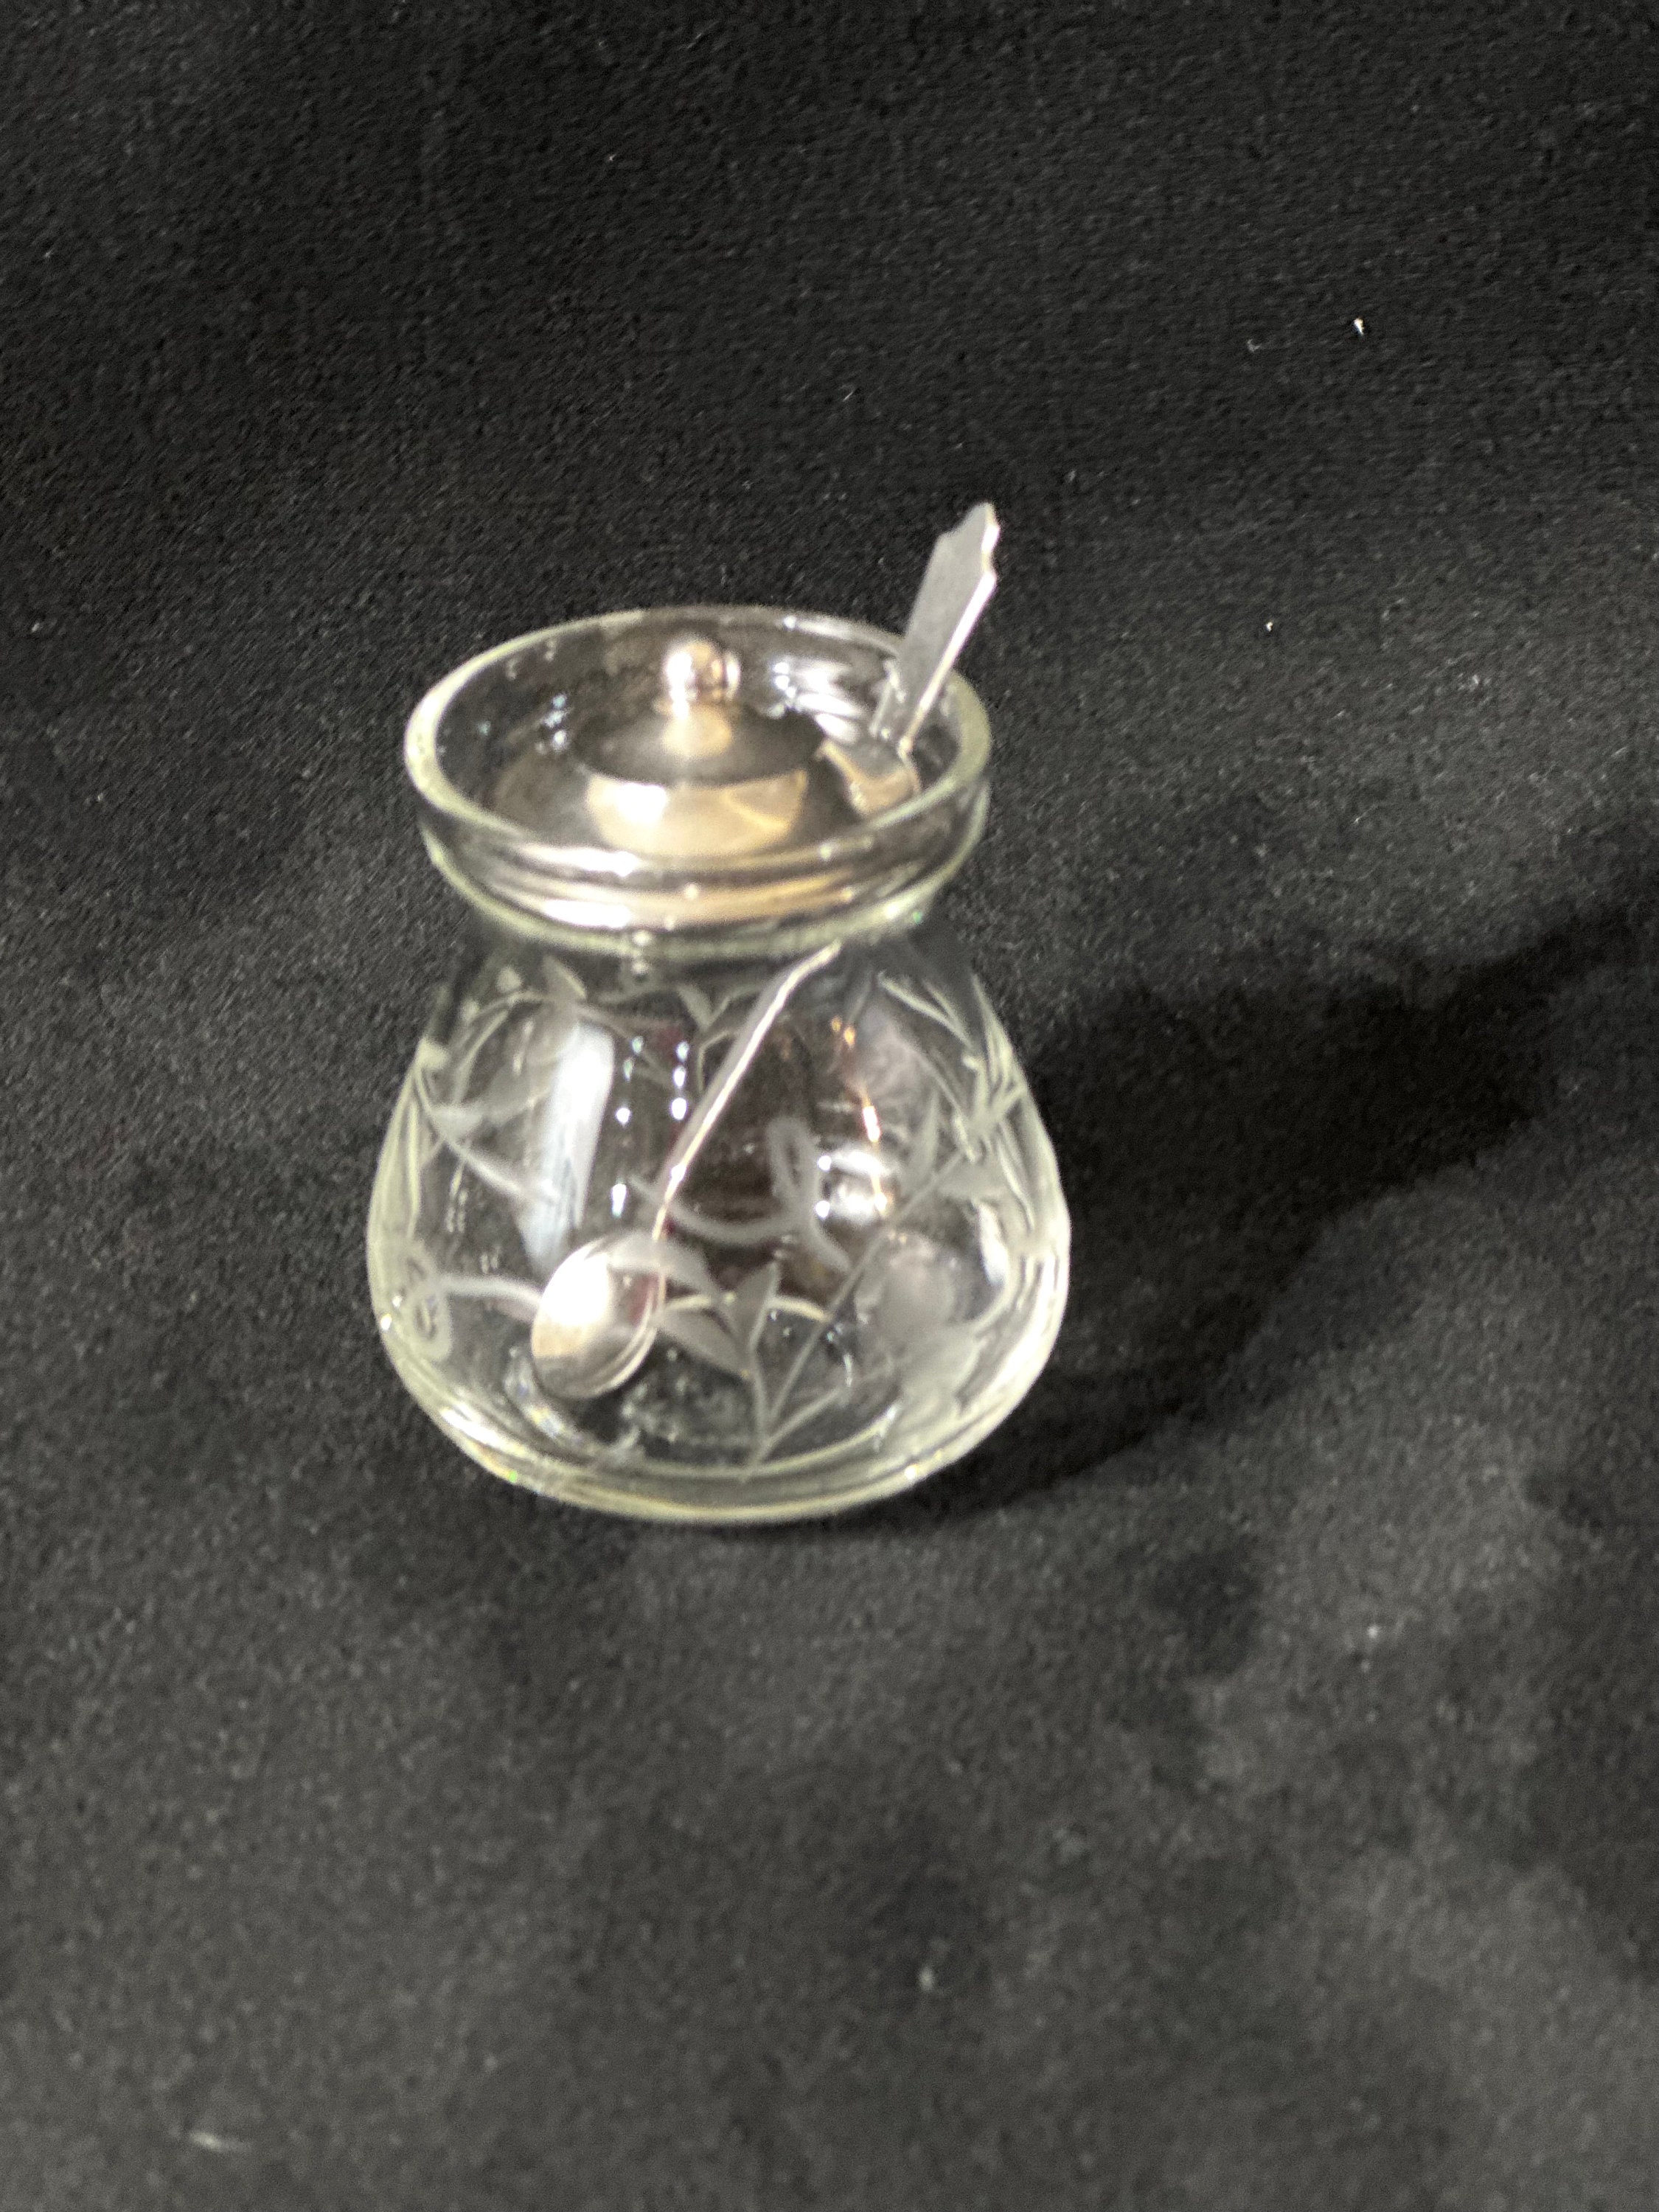 Antique Sterling Silver and Etched Glass Mustard Jar Lid & Spoon Vintage  Victorian Crystal Cut Glass Floral Design Lidded Spice Container 